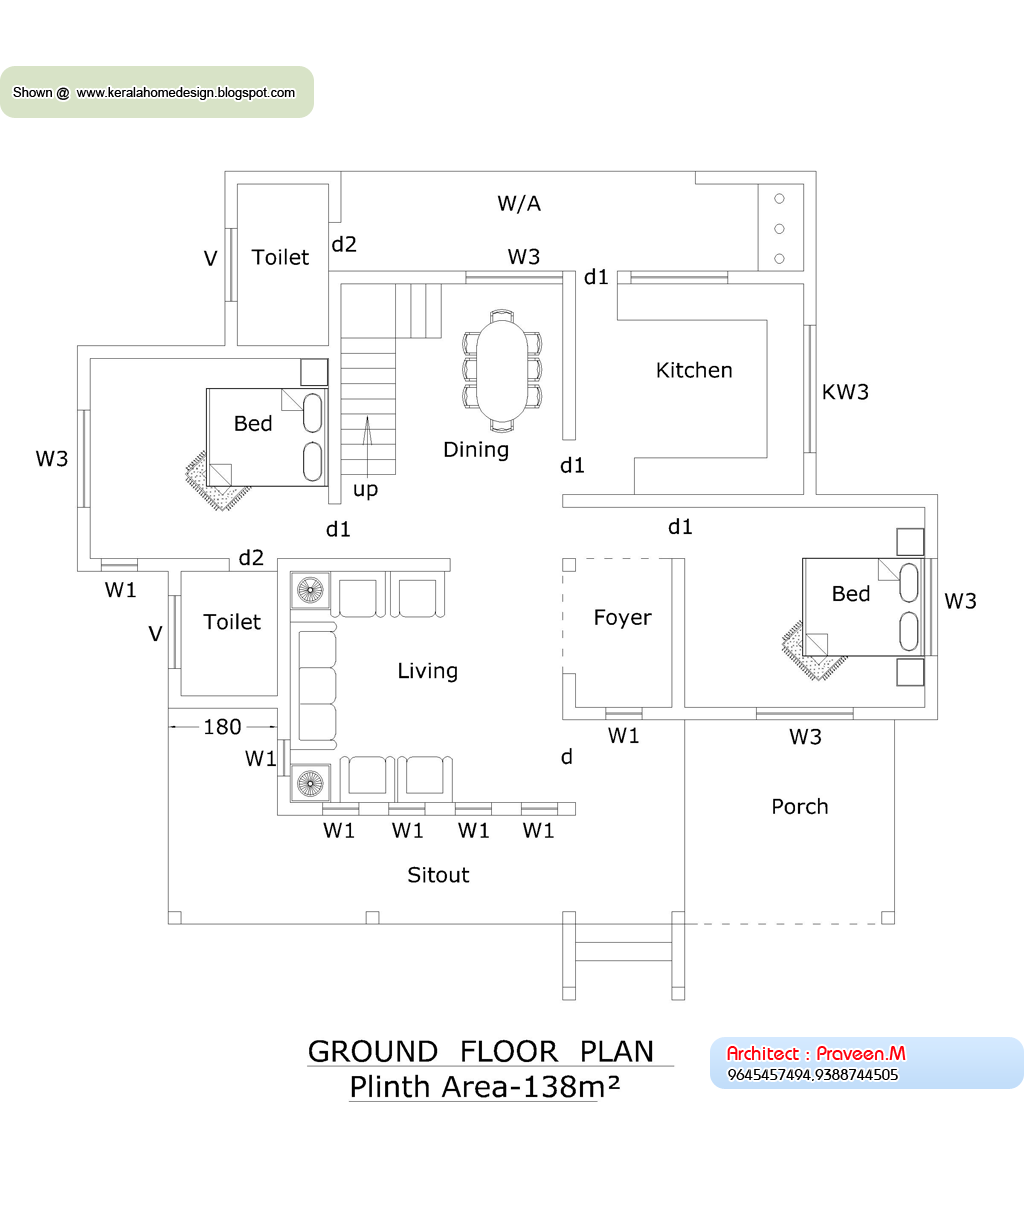  Kerala  Home  plan  and elevation  2378 Sq  Ft  home  appliance